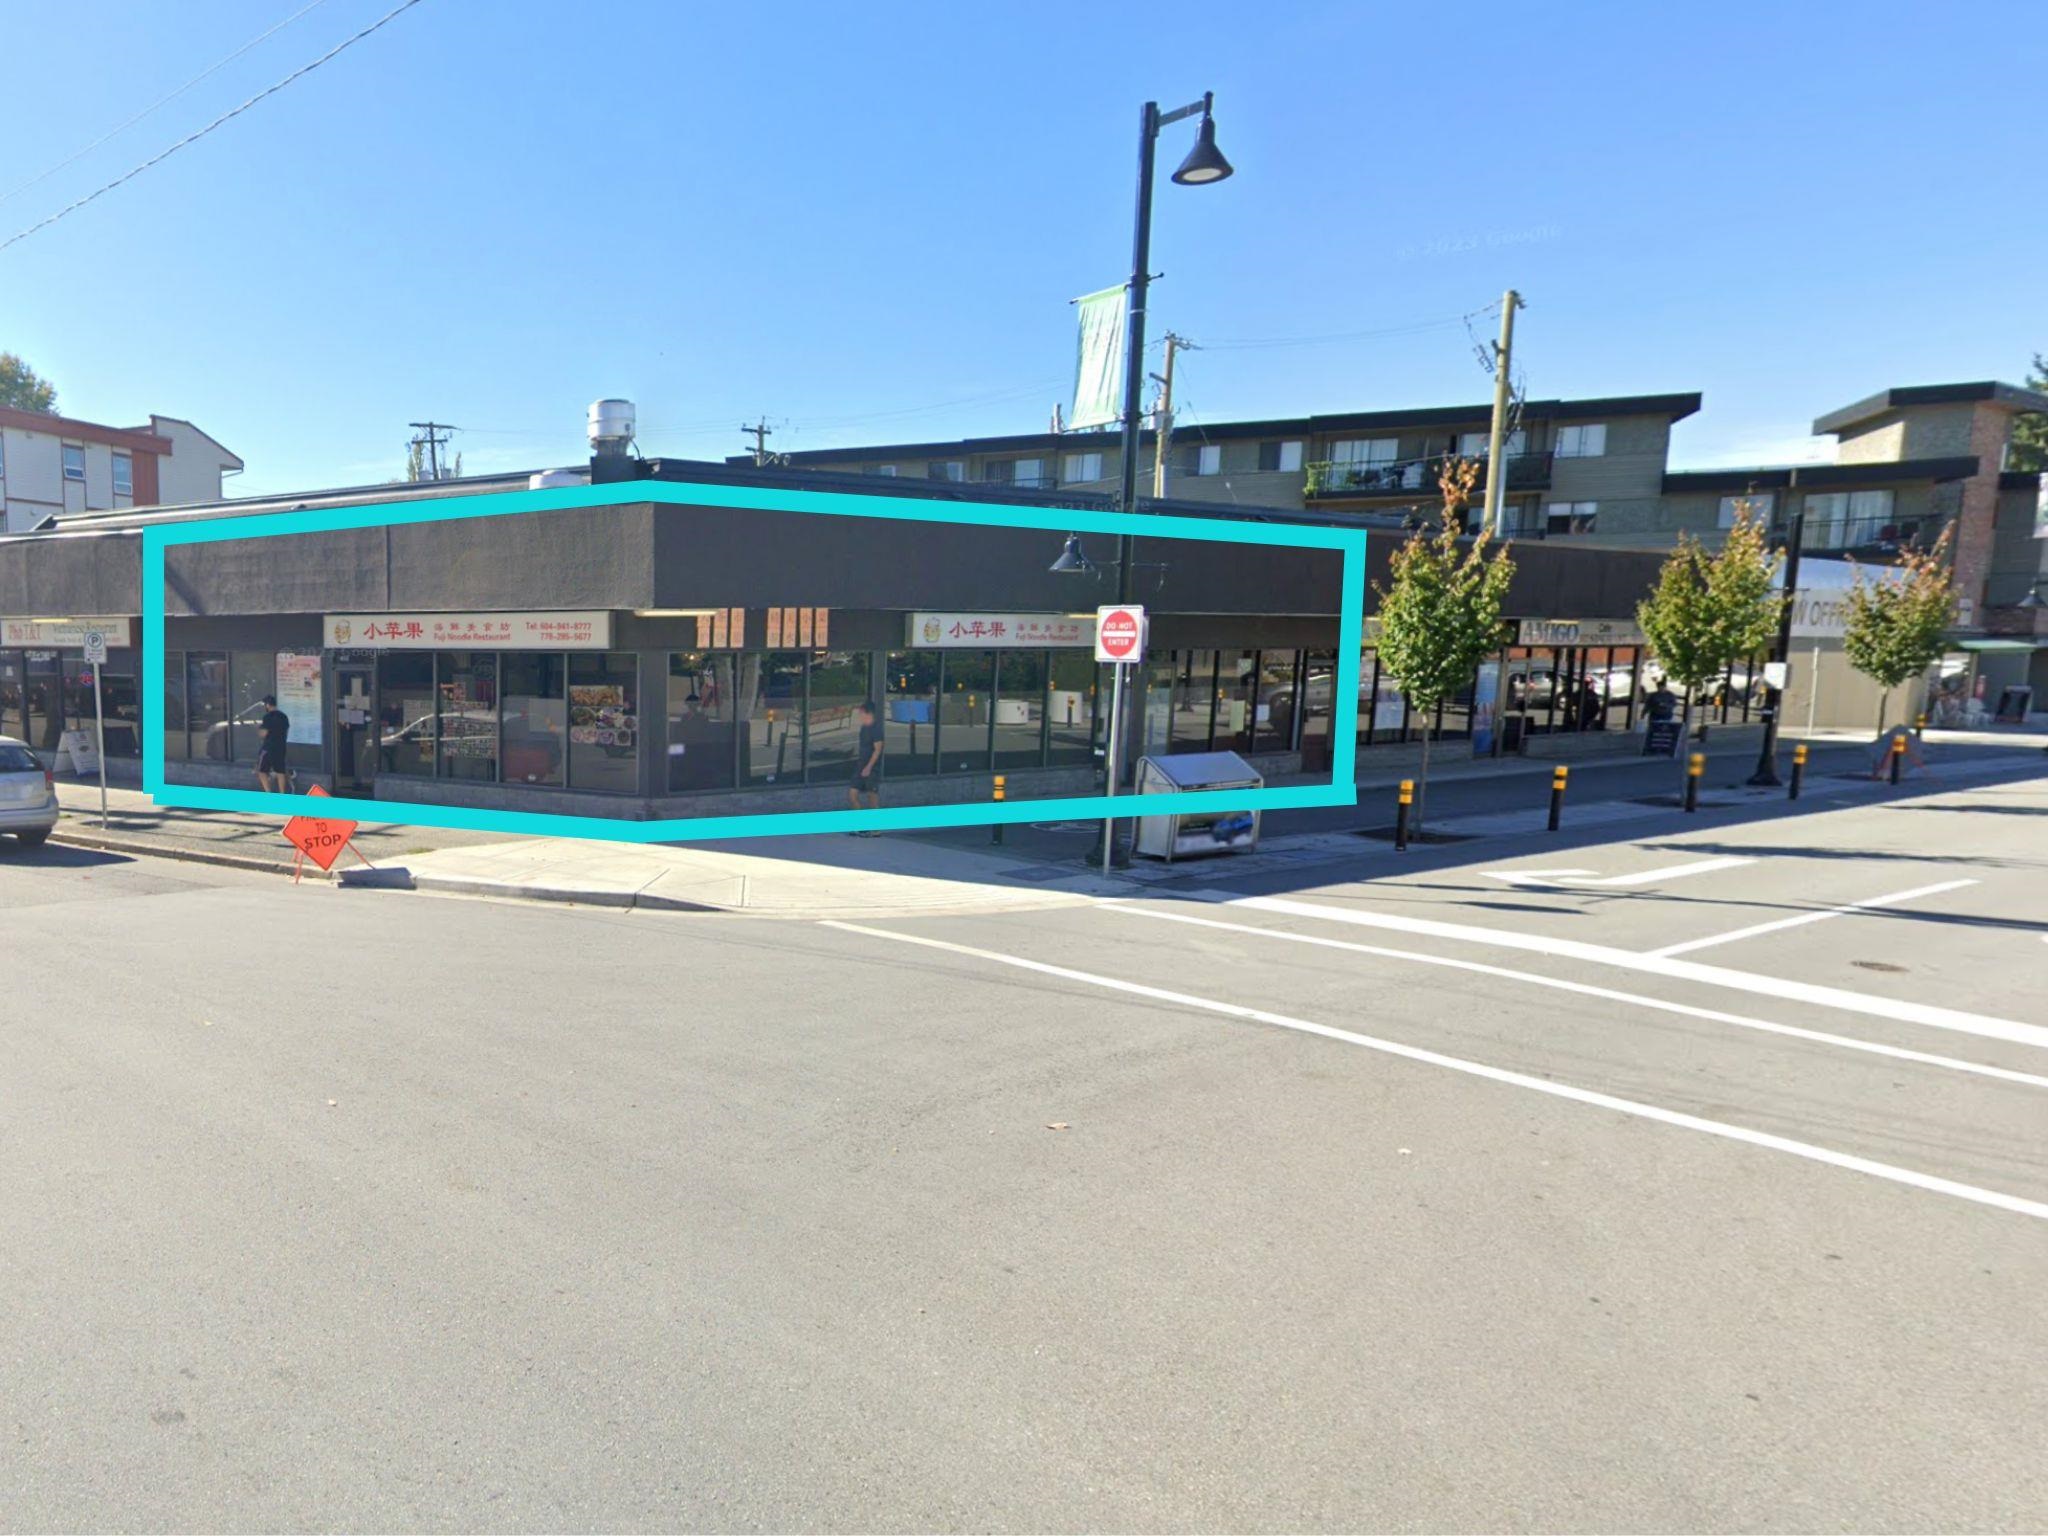 Central Pt Coquitlam Land Commercial for sale:    (Listed 6800-05-09)